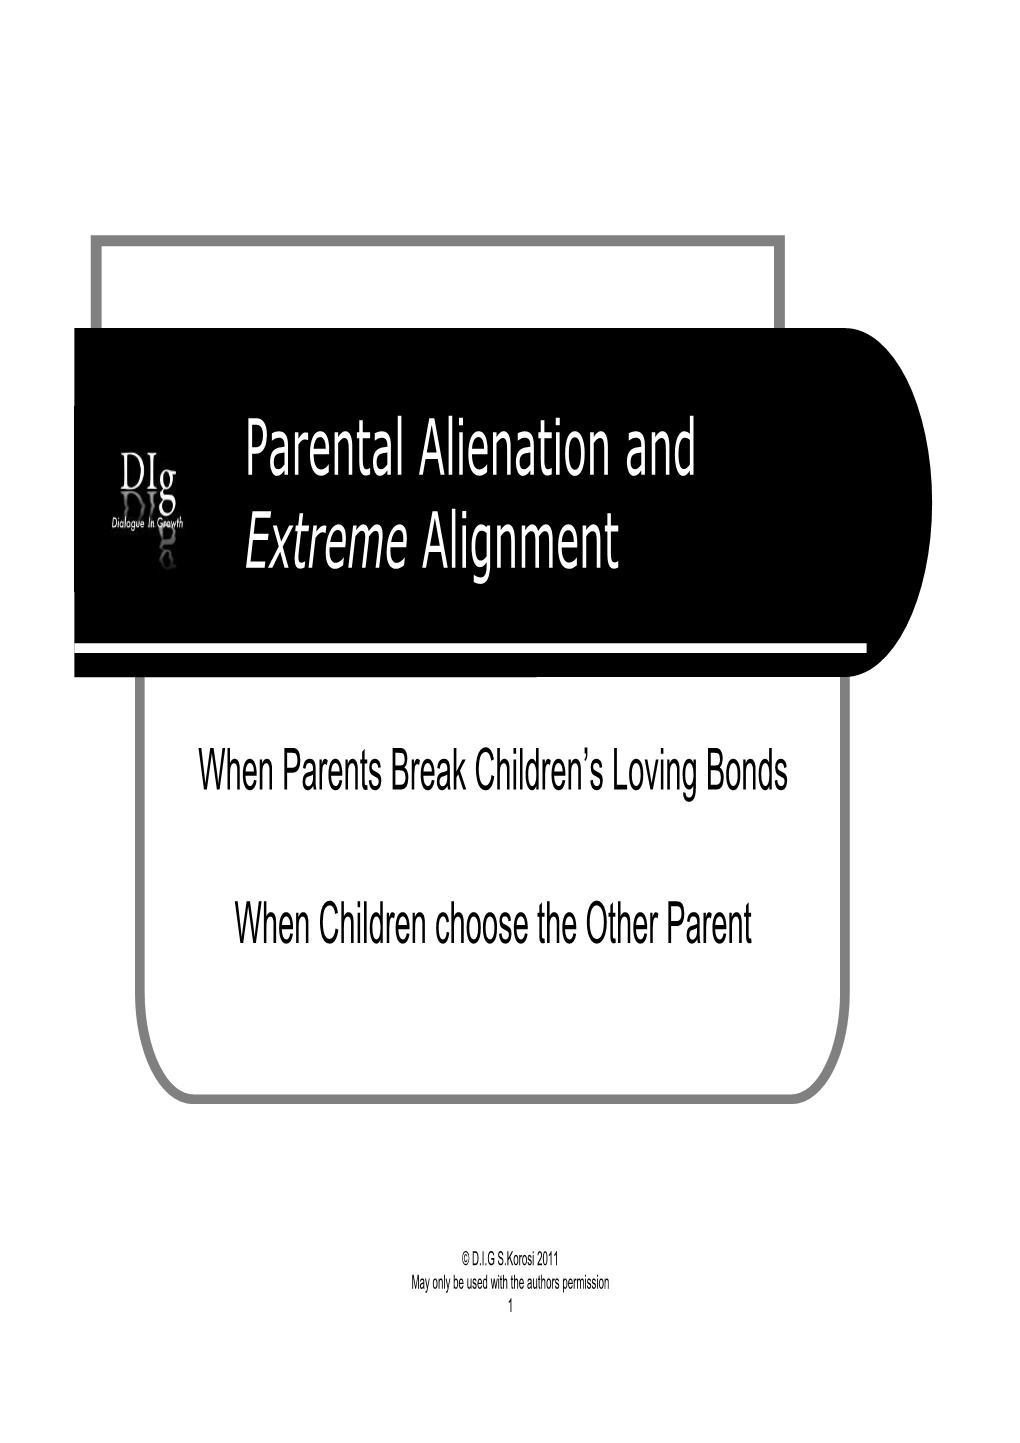 Parental Alienation and Extreme Alignment